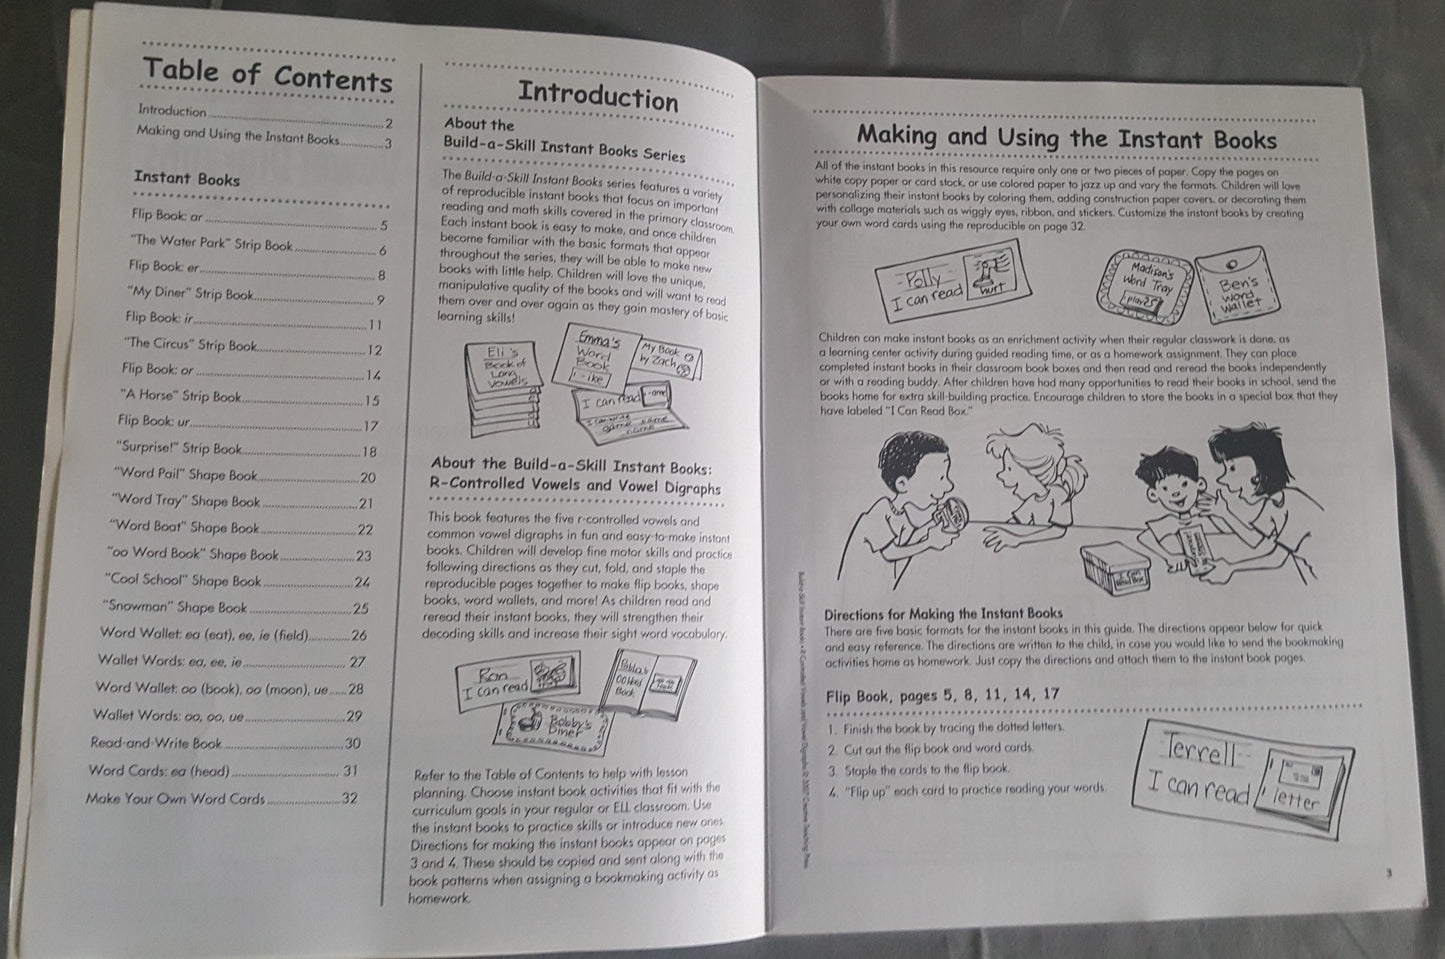 Build a Skill Instant Books 8 book set covers phonics and other language arts subjects